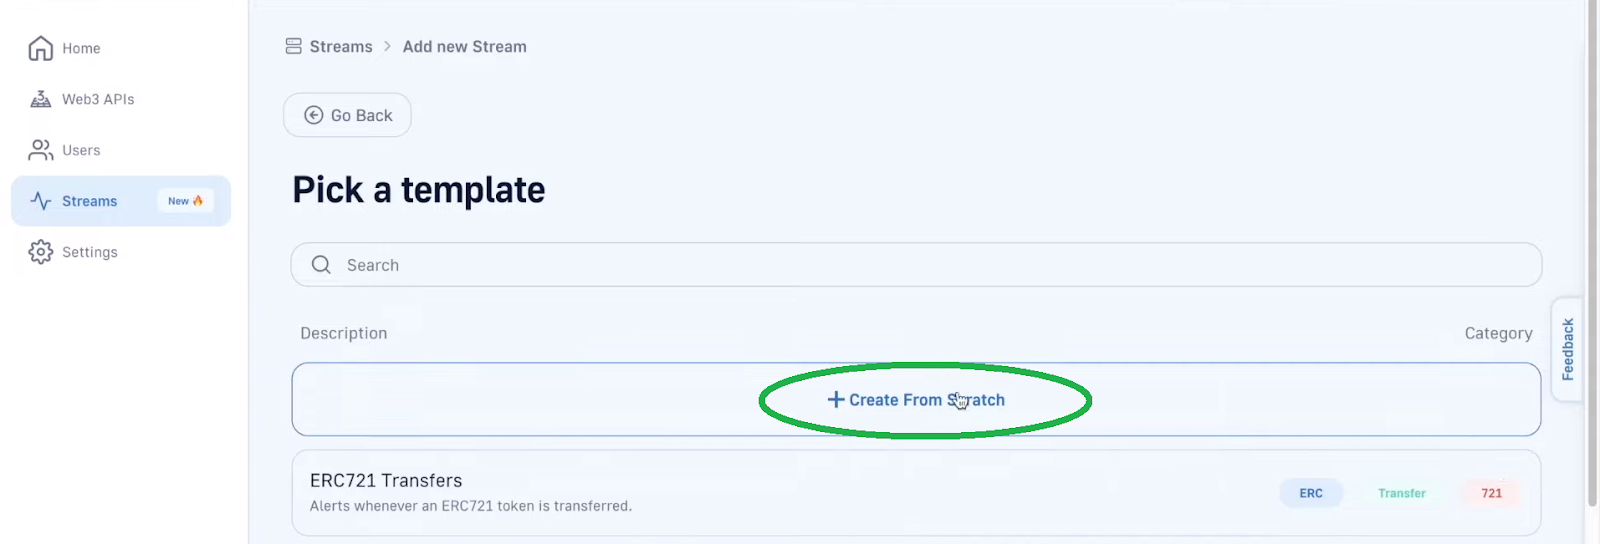 The "+ Create From Scratch" button is highlighted.